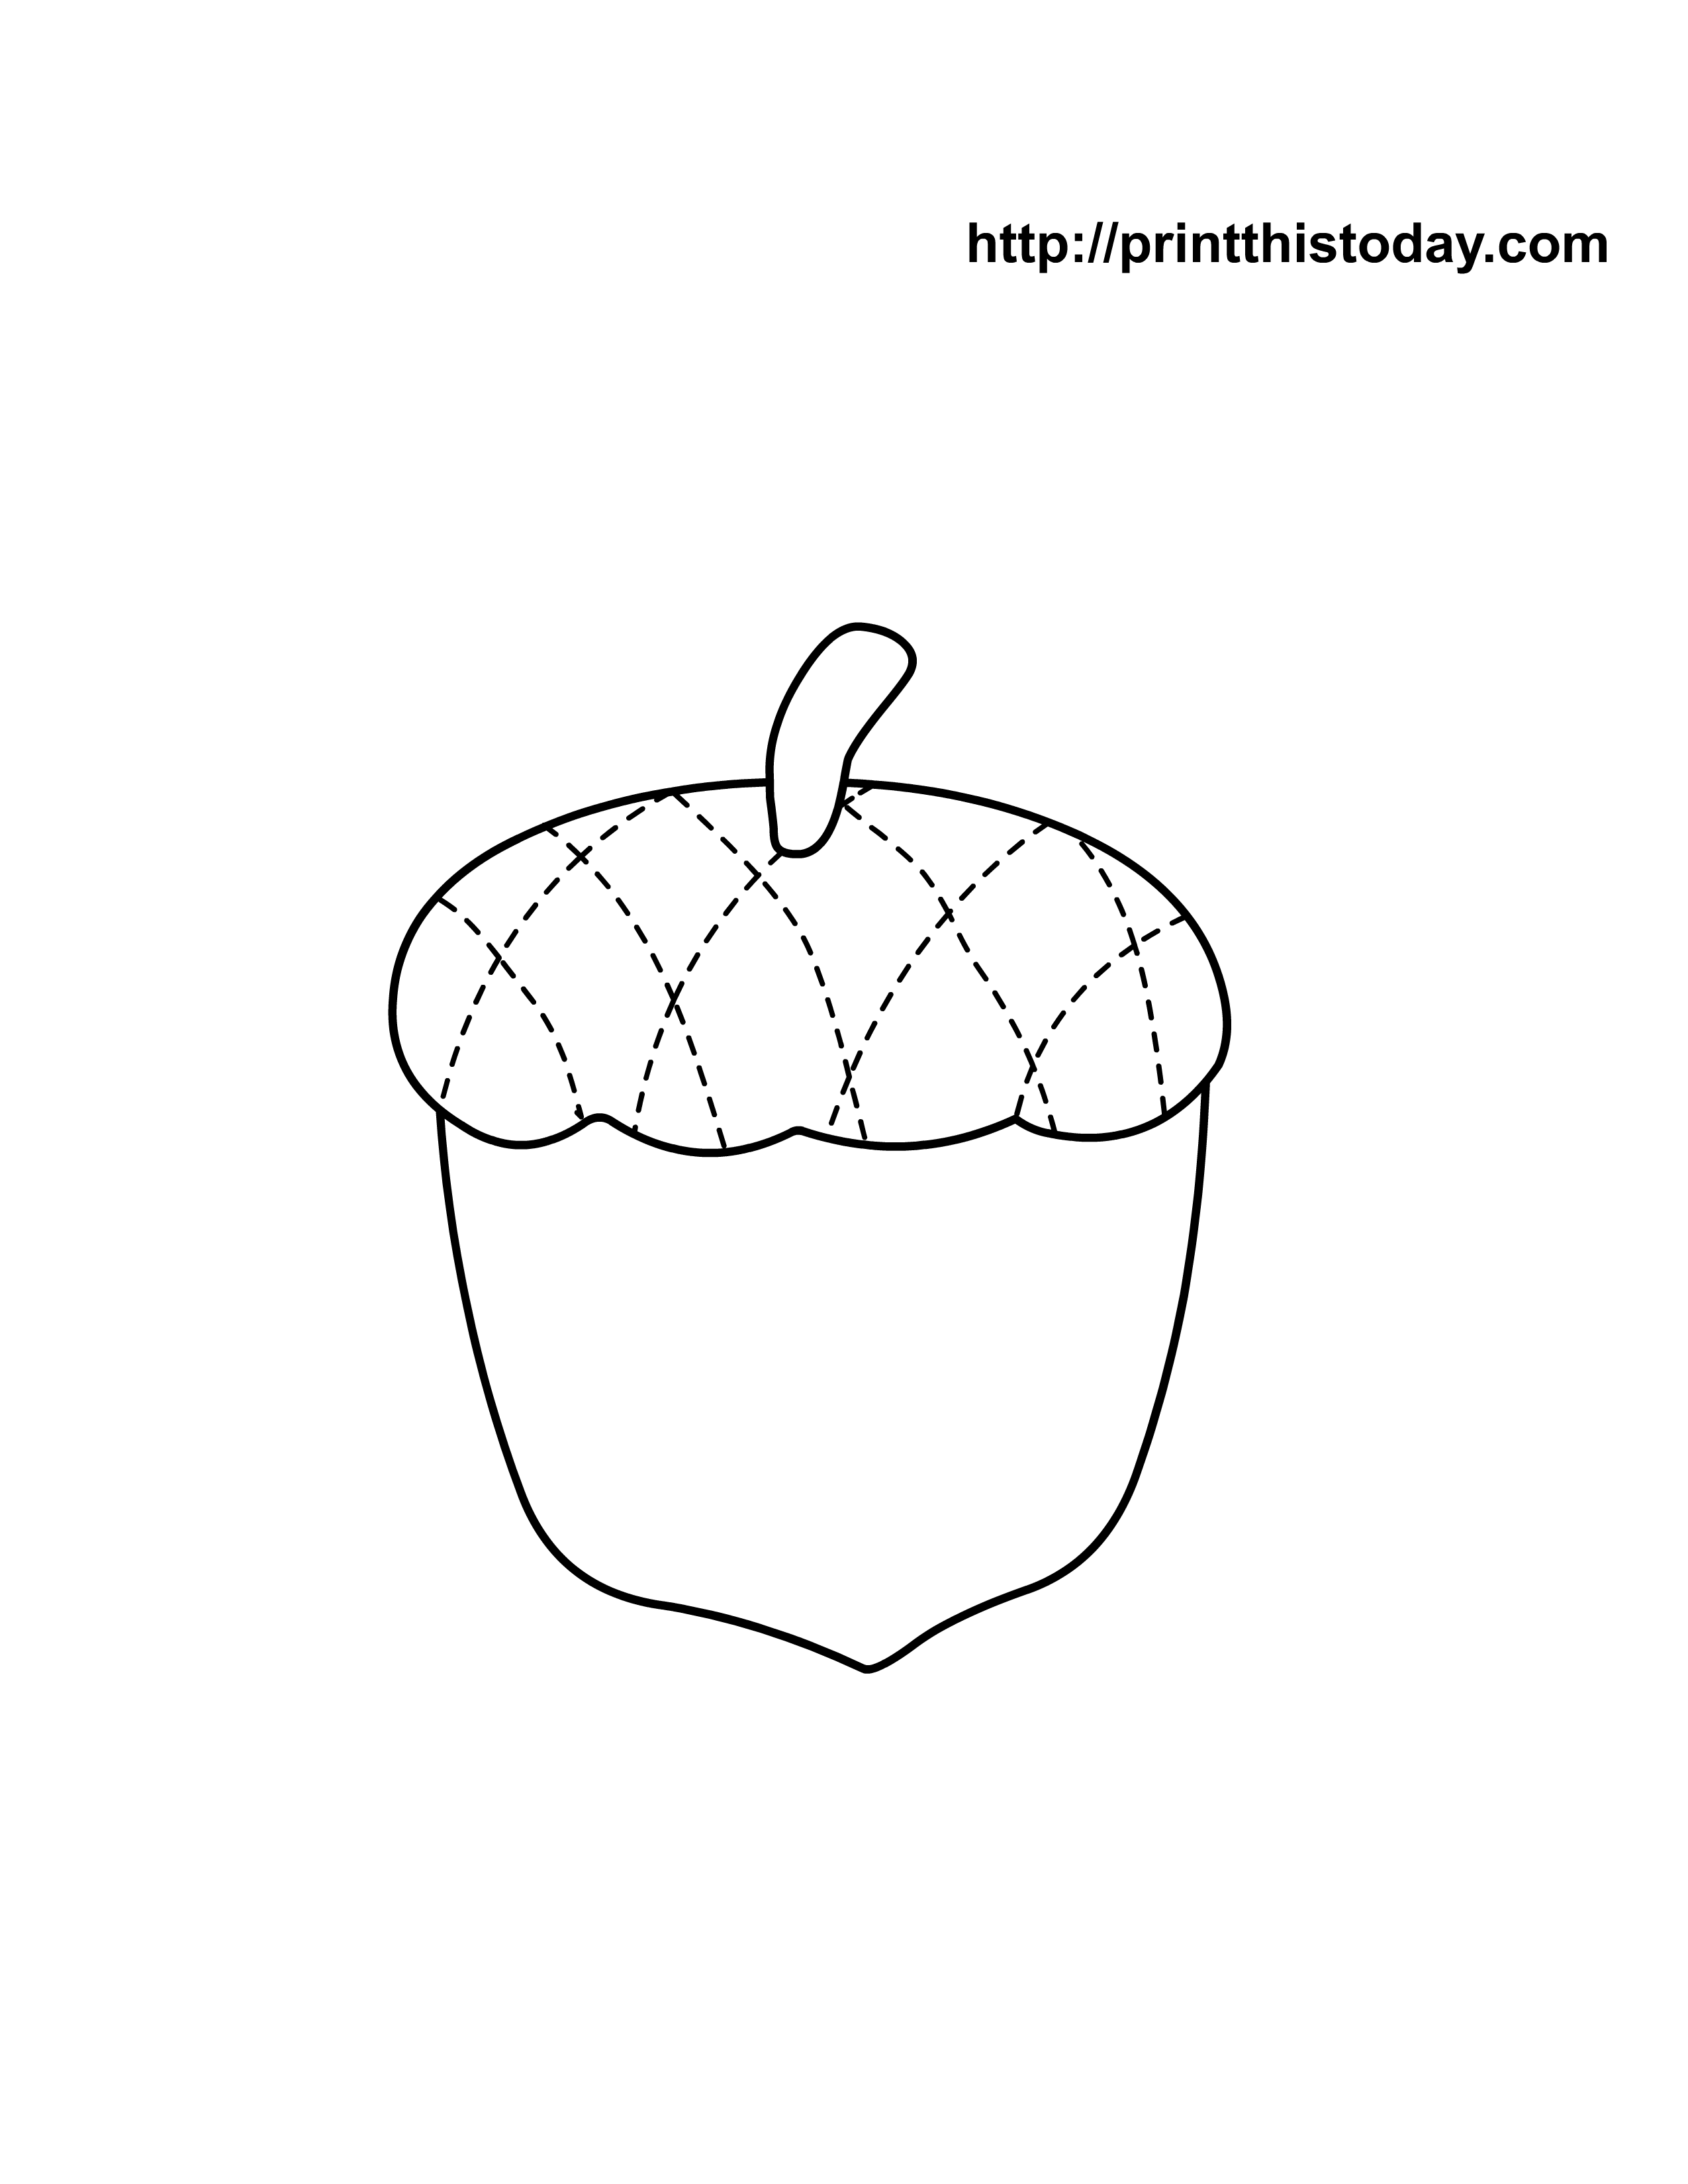 Acorn For Kids - Coloring Pages for Kids and for Adults